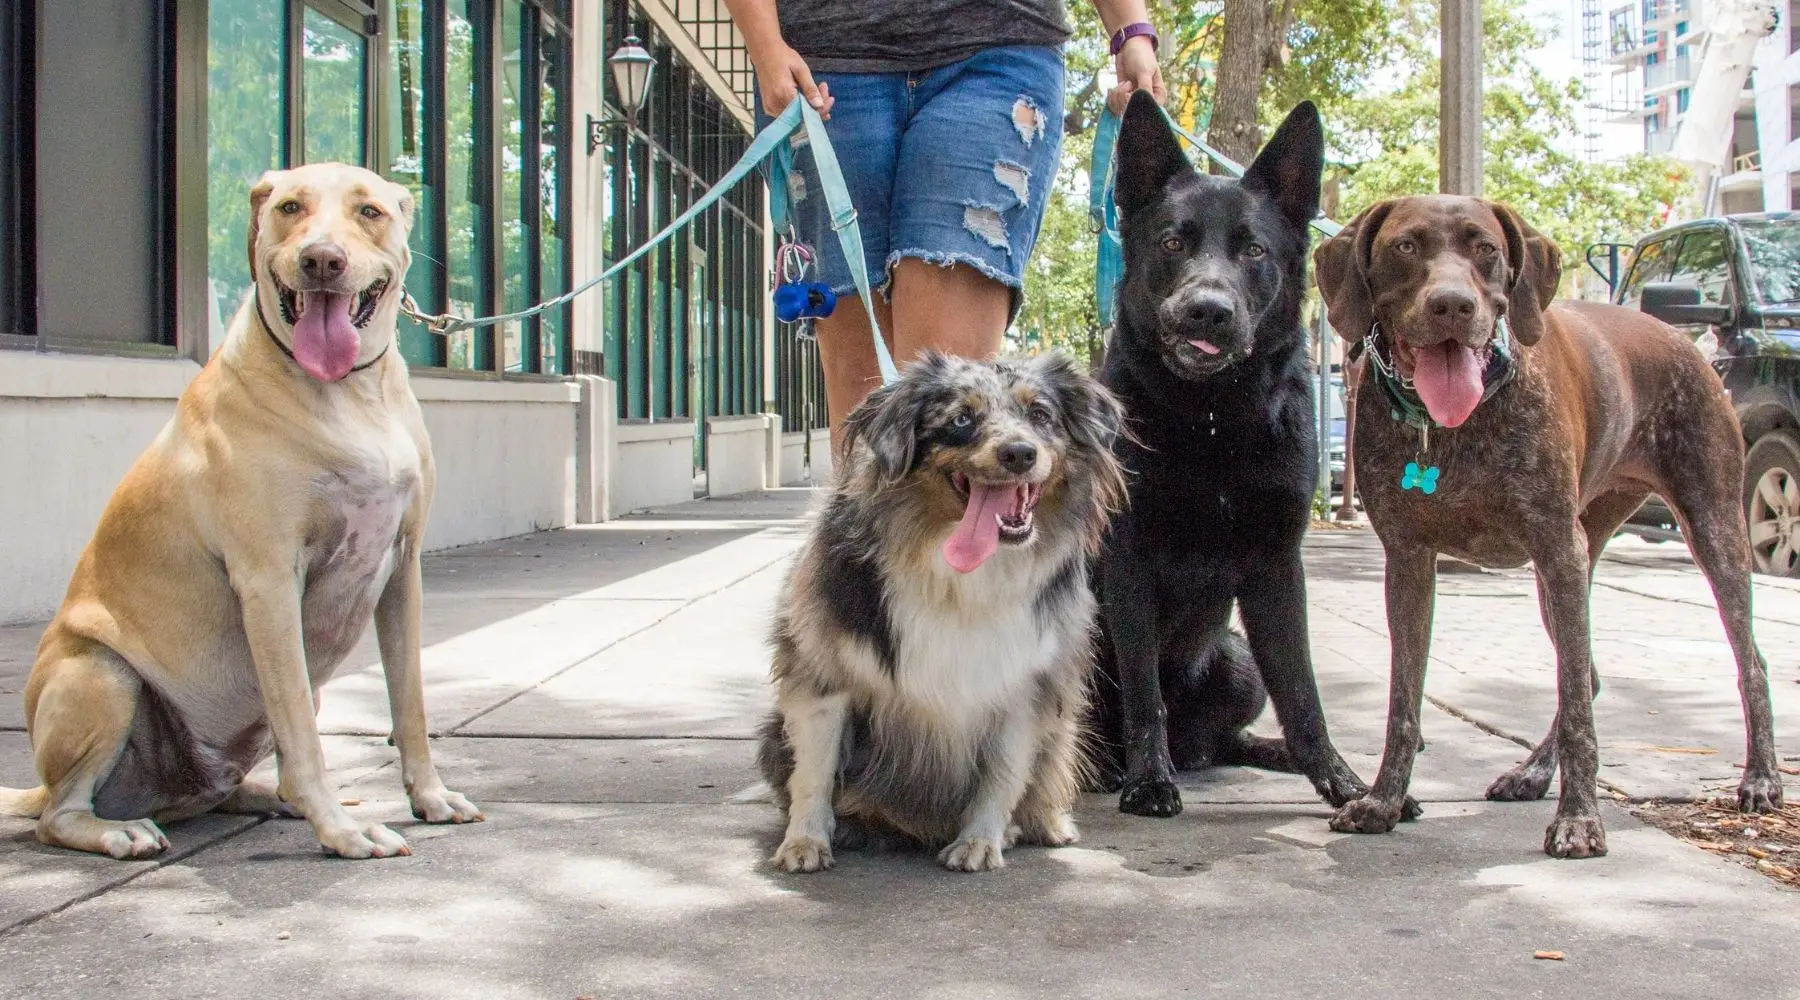 Four very different dogs wait patiently to begin their walk.